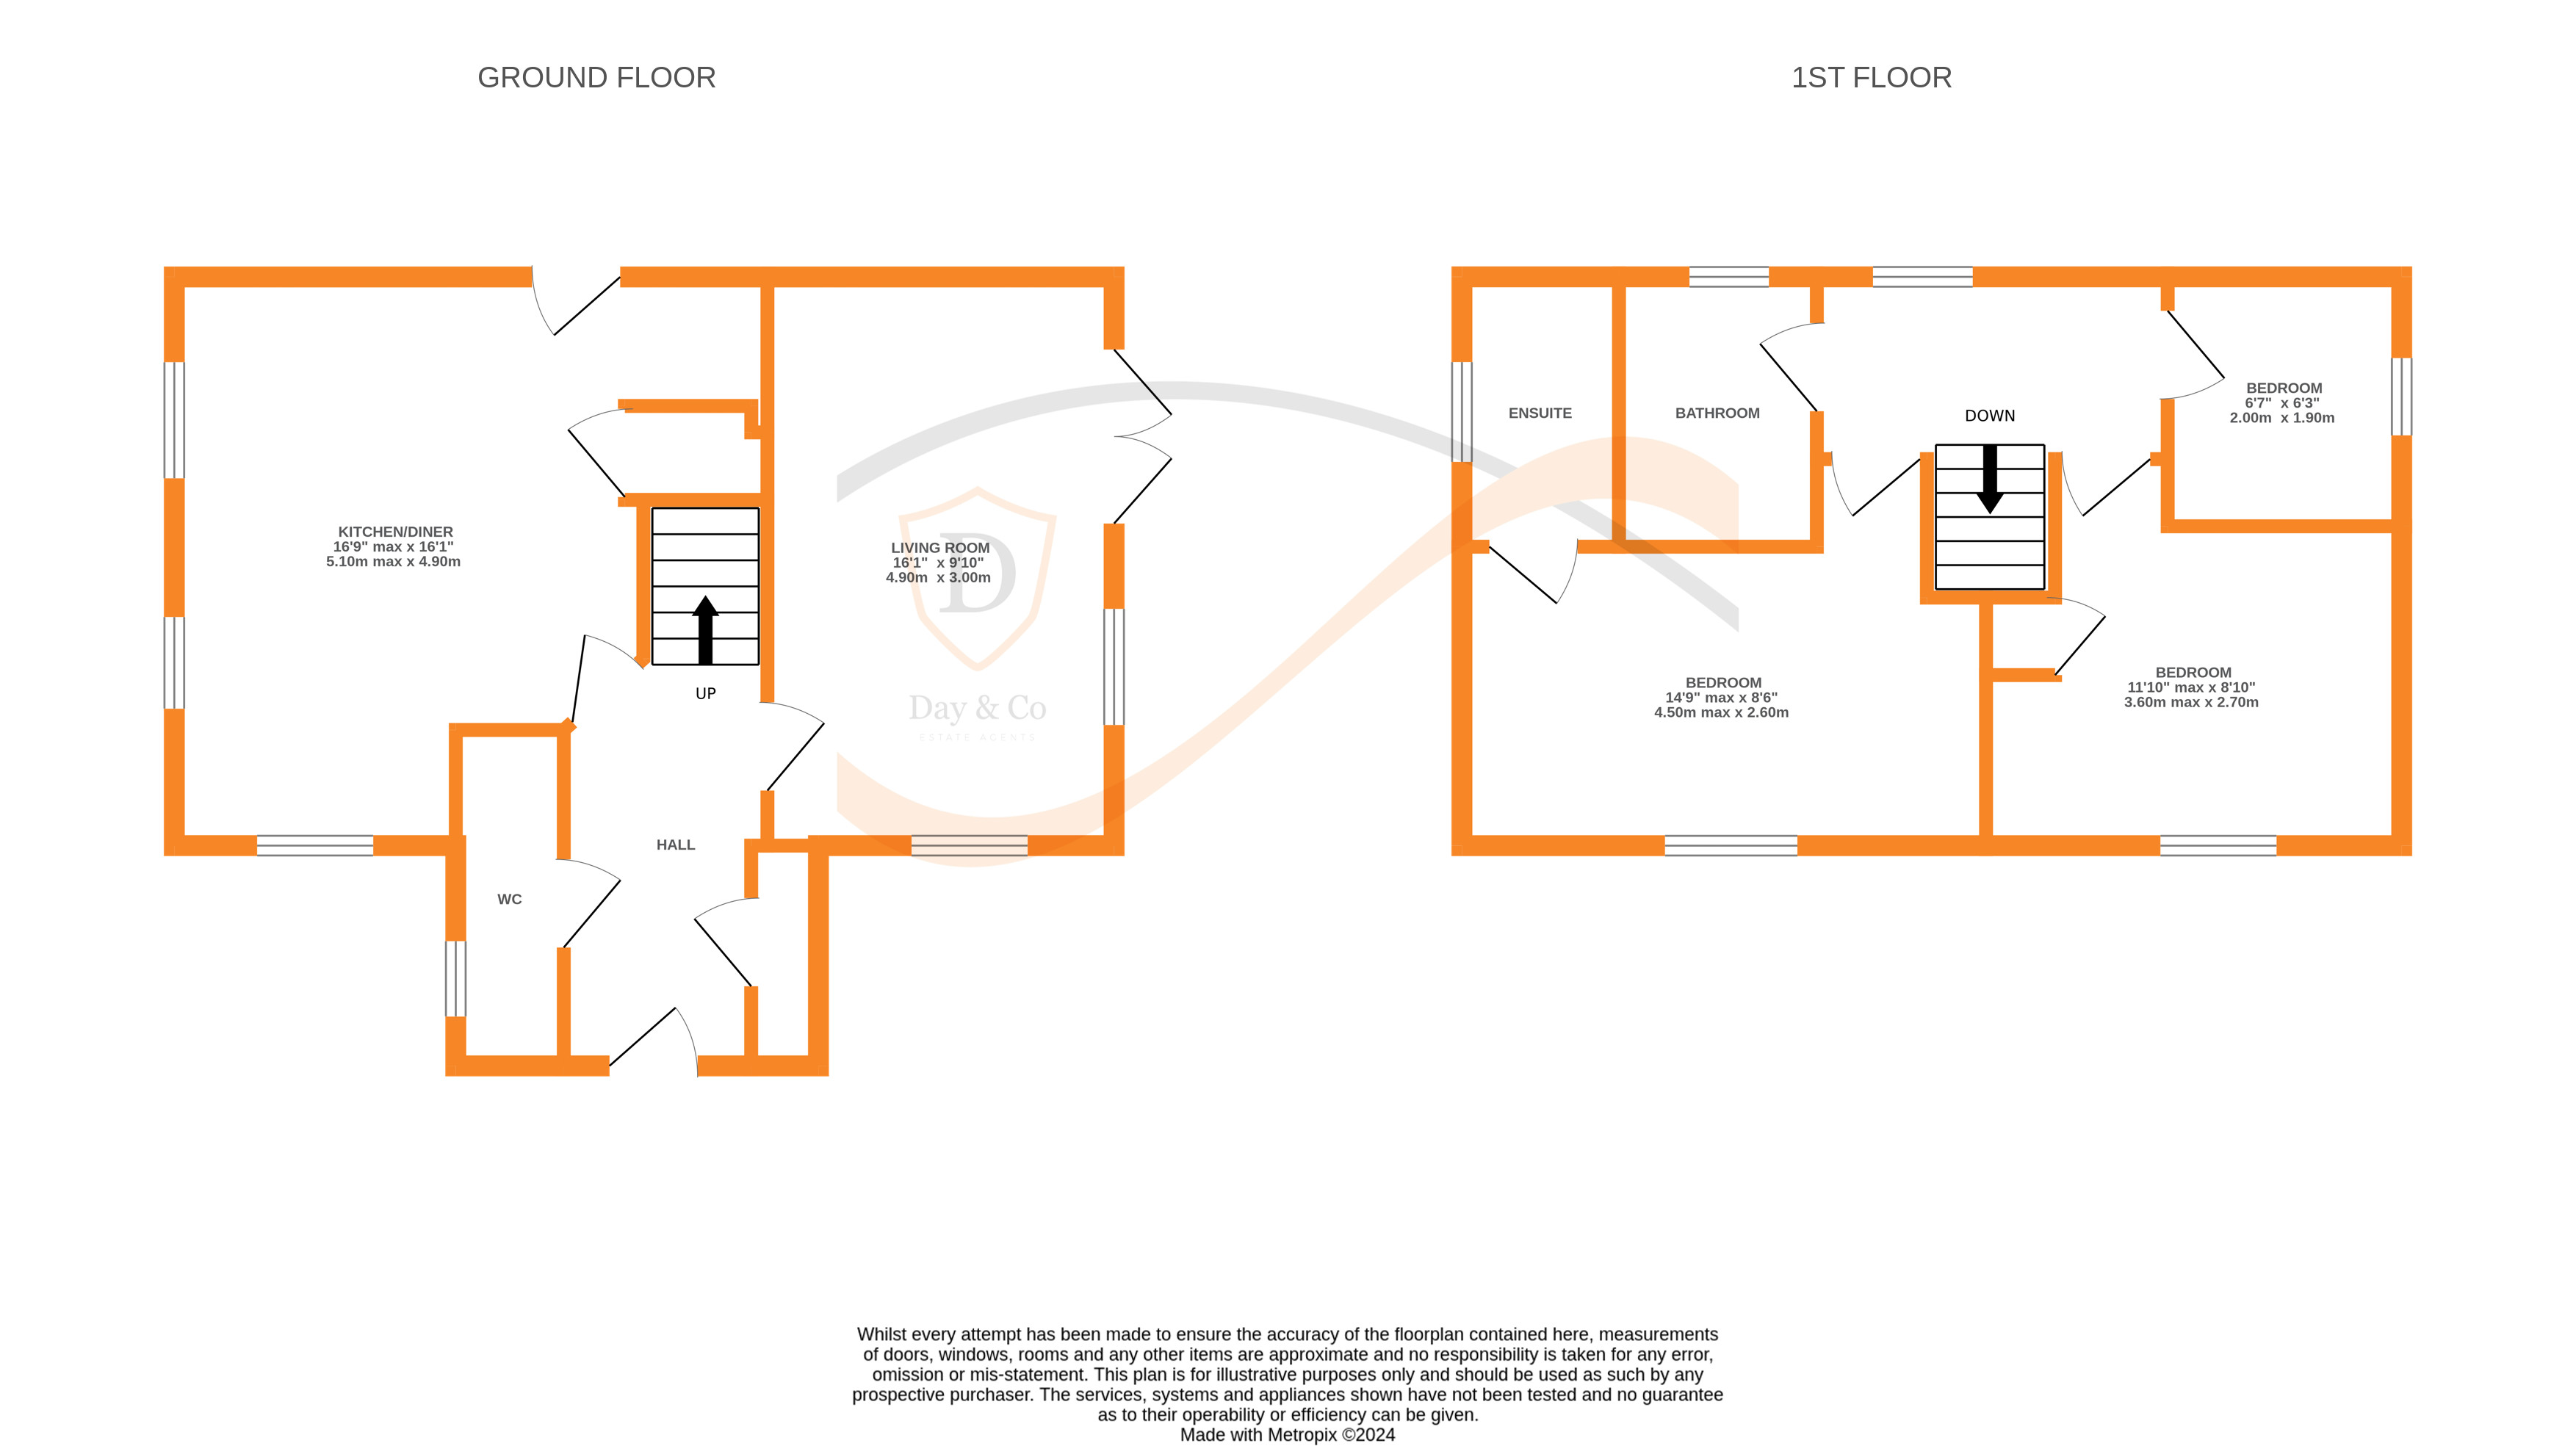 Floorplans For Low Whin Fold, Keighley, West Yorkshire